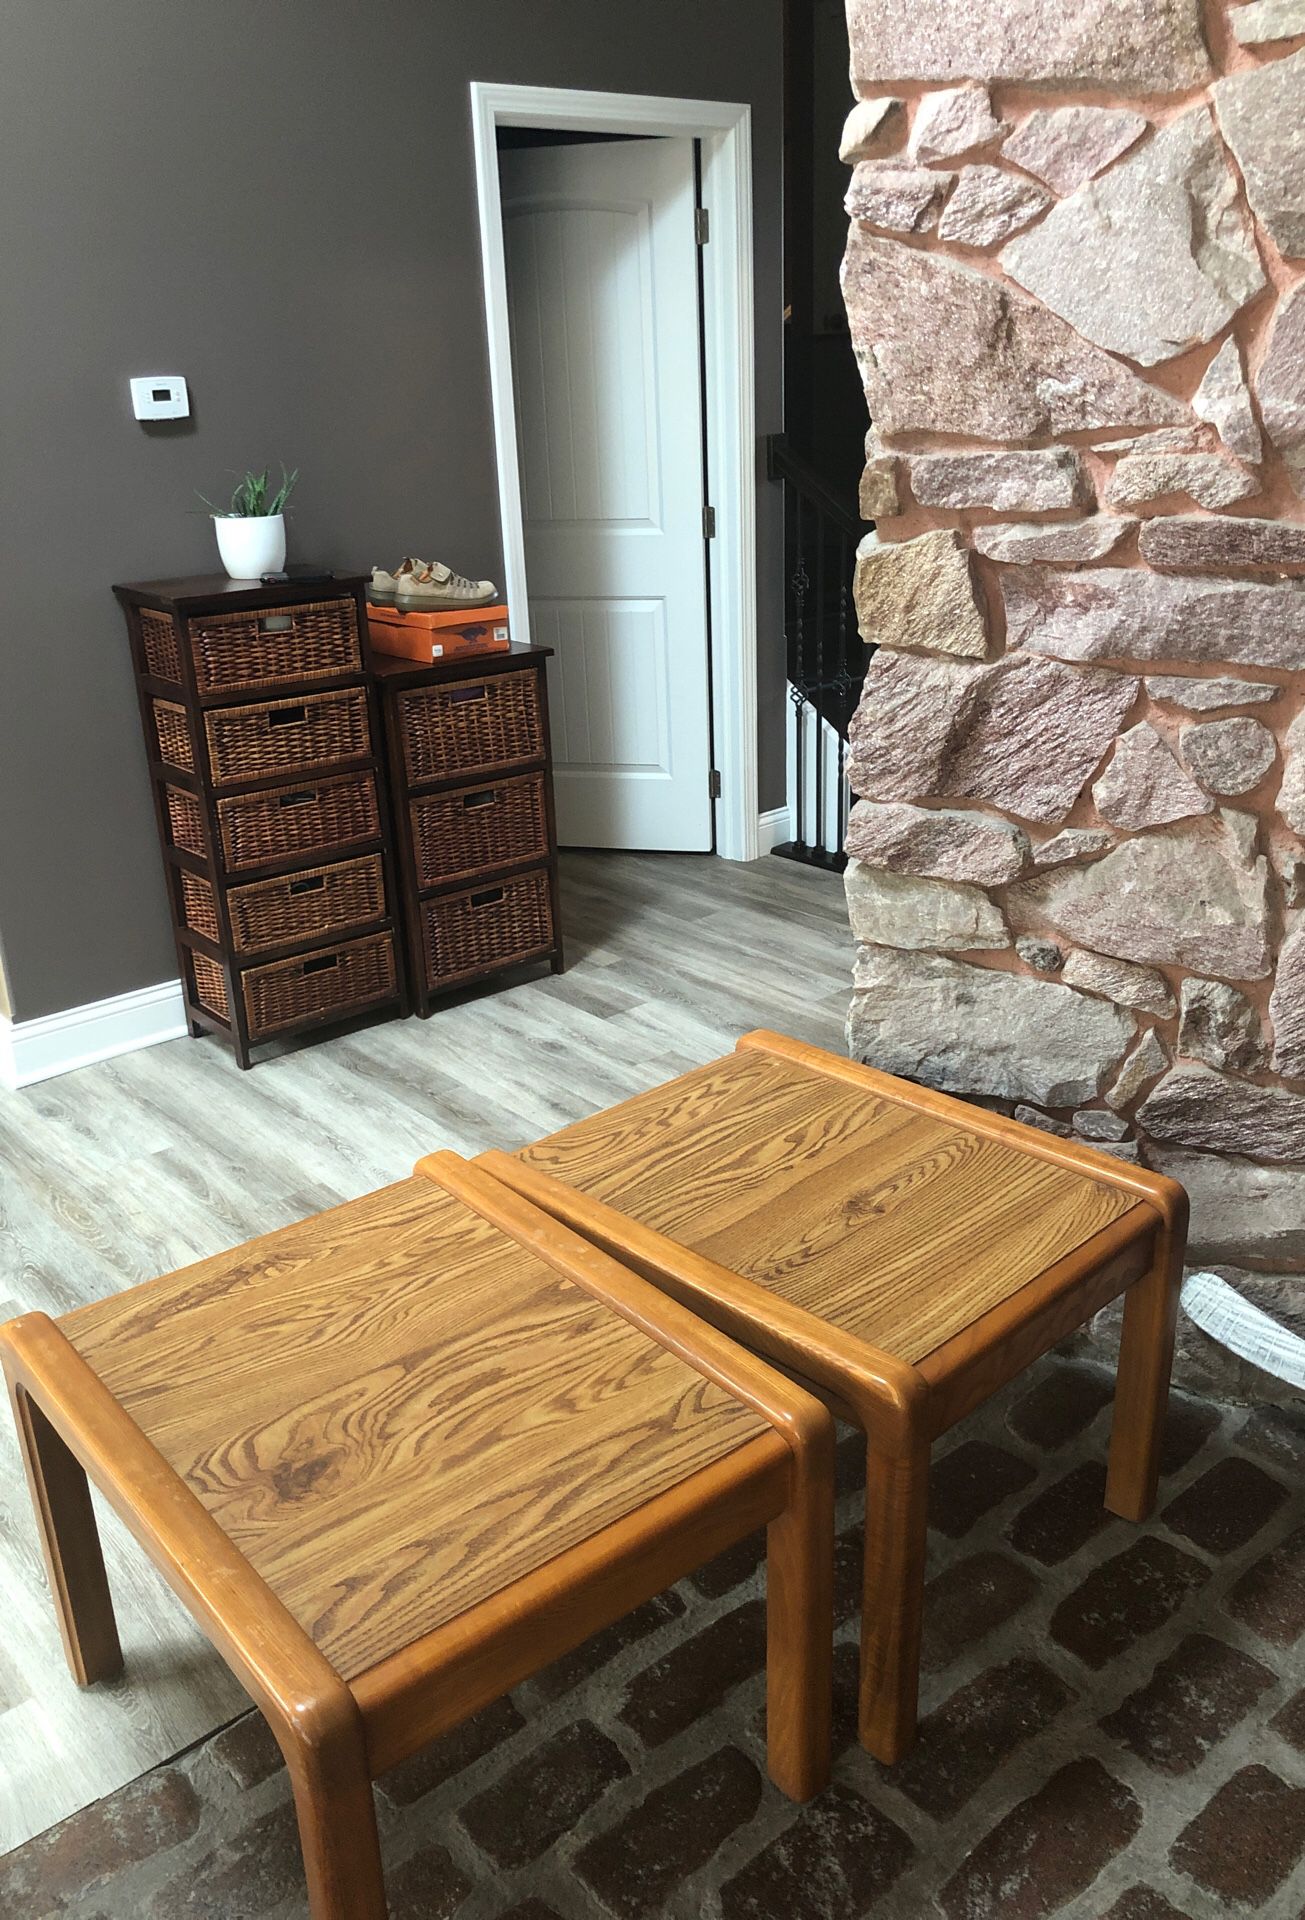 Set of three end table and matching coffee table